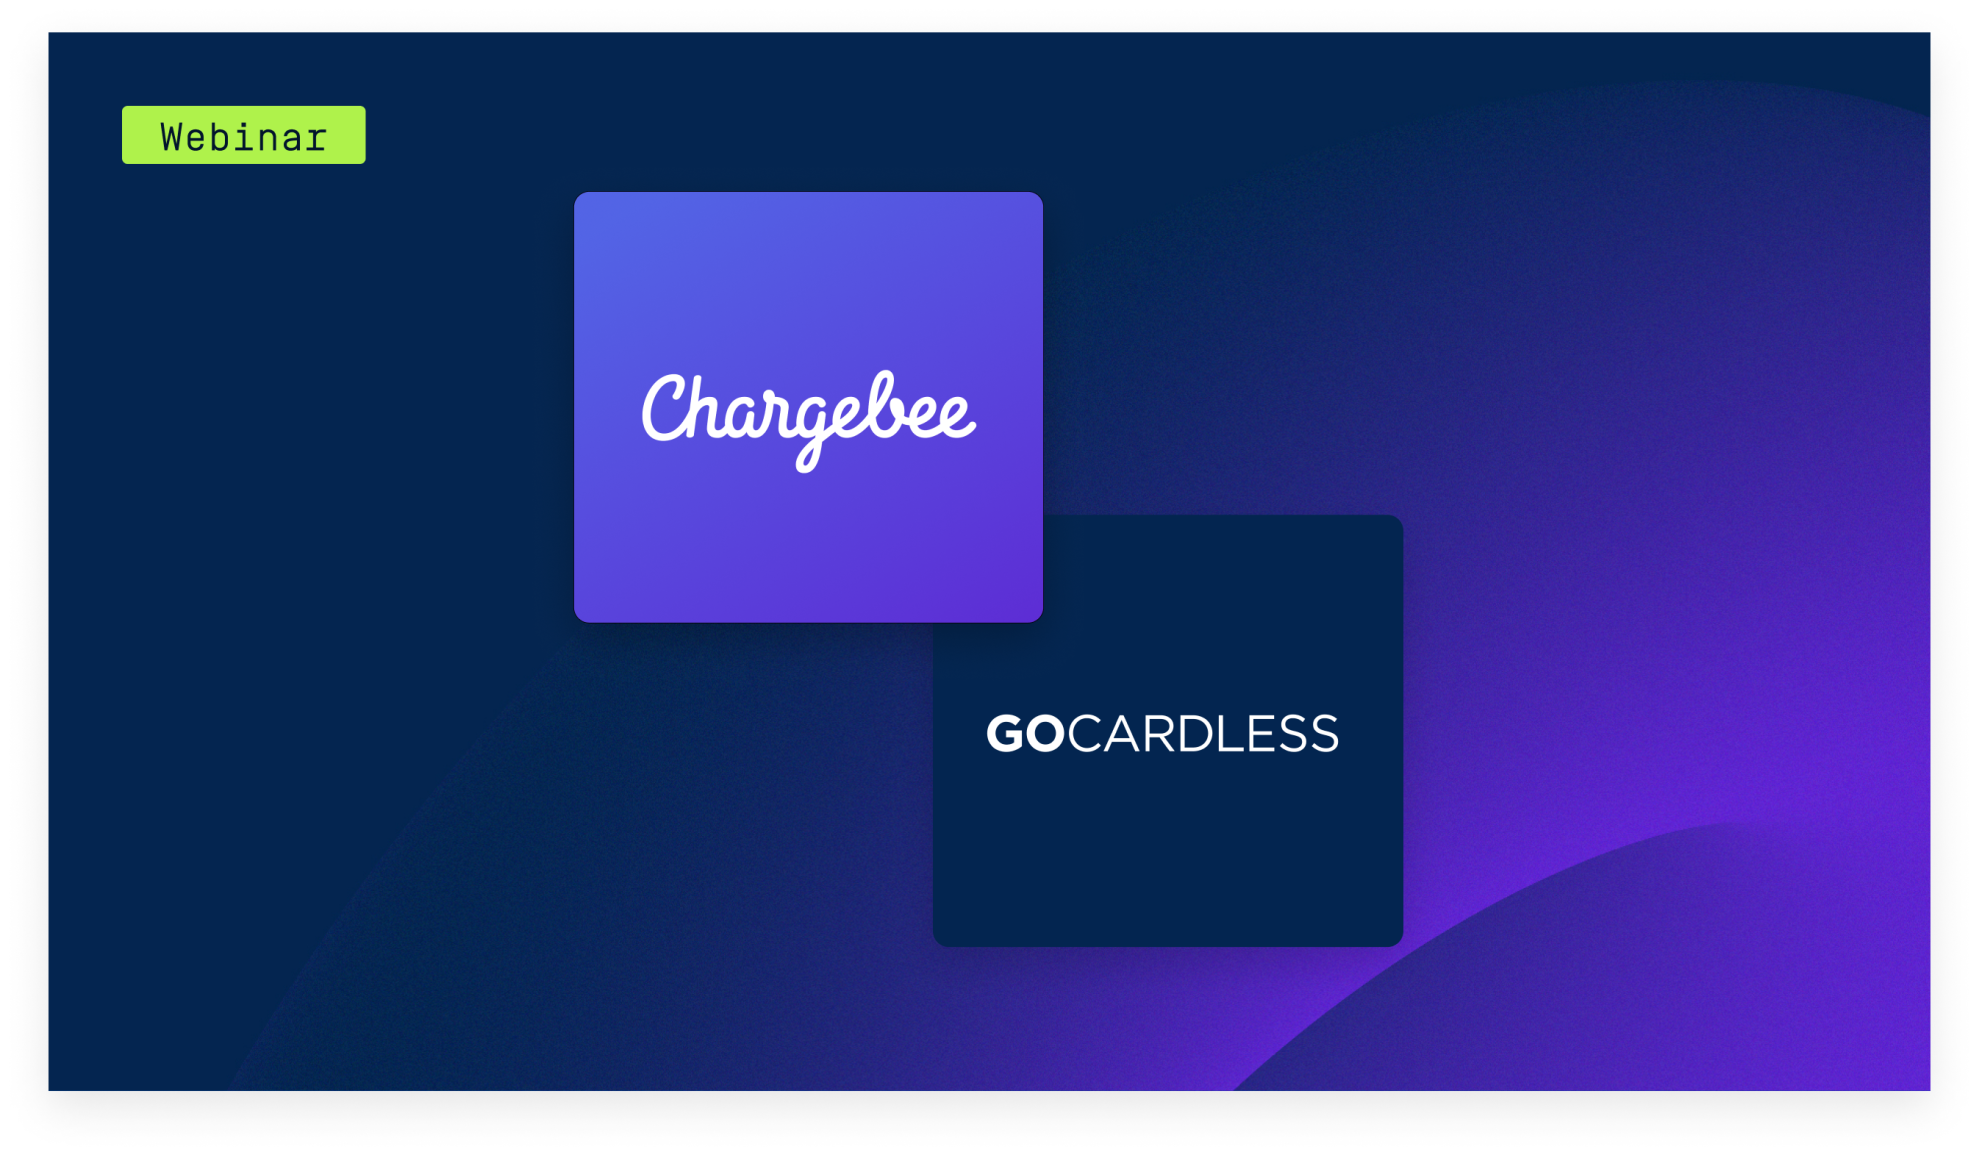 [Webinar] Gocardless and Chargebee - Revenue Recognition